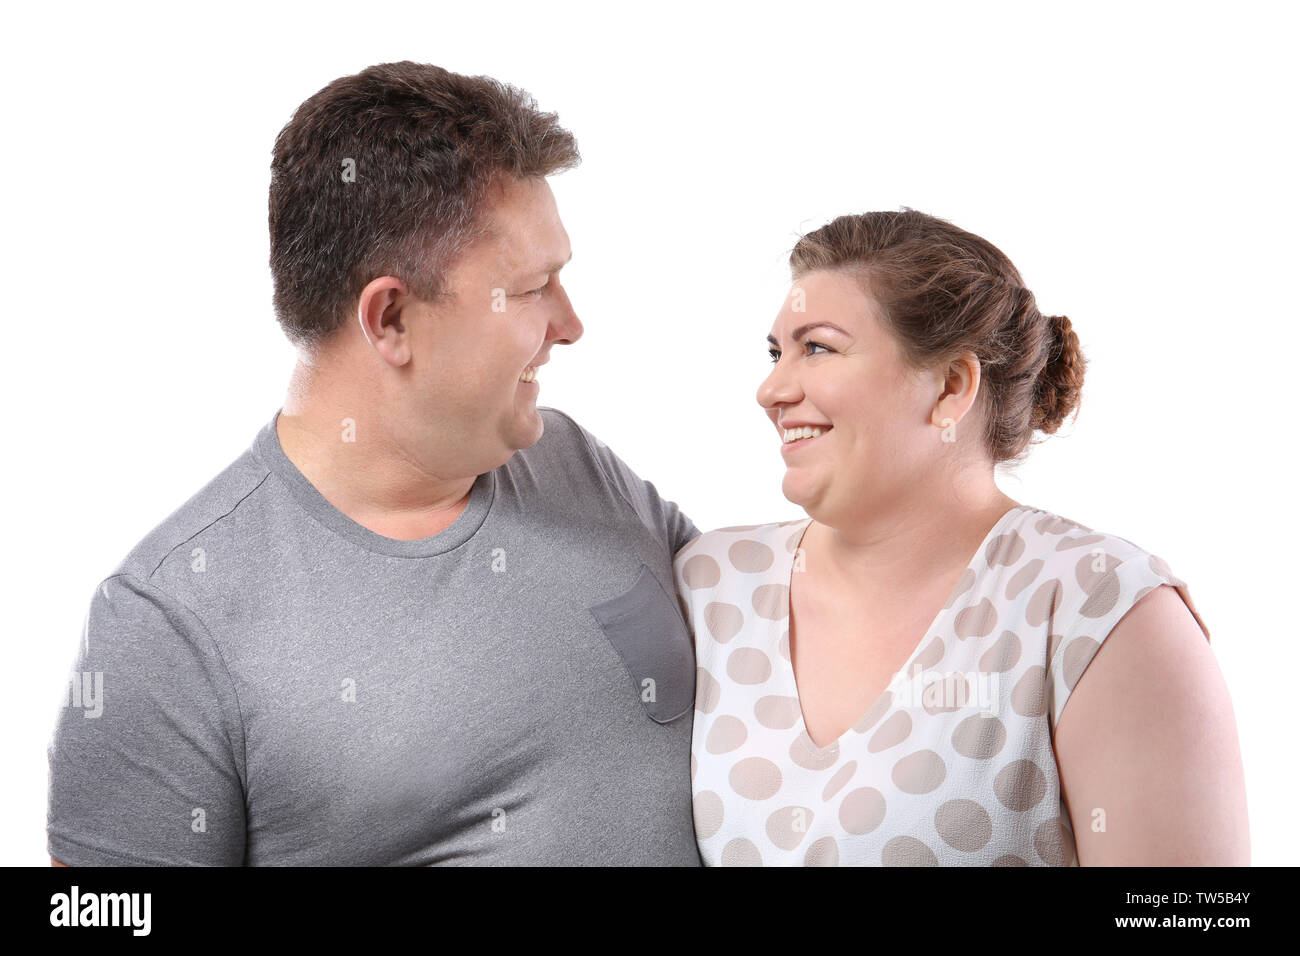 Overweight couple on white background Stock Photo